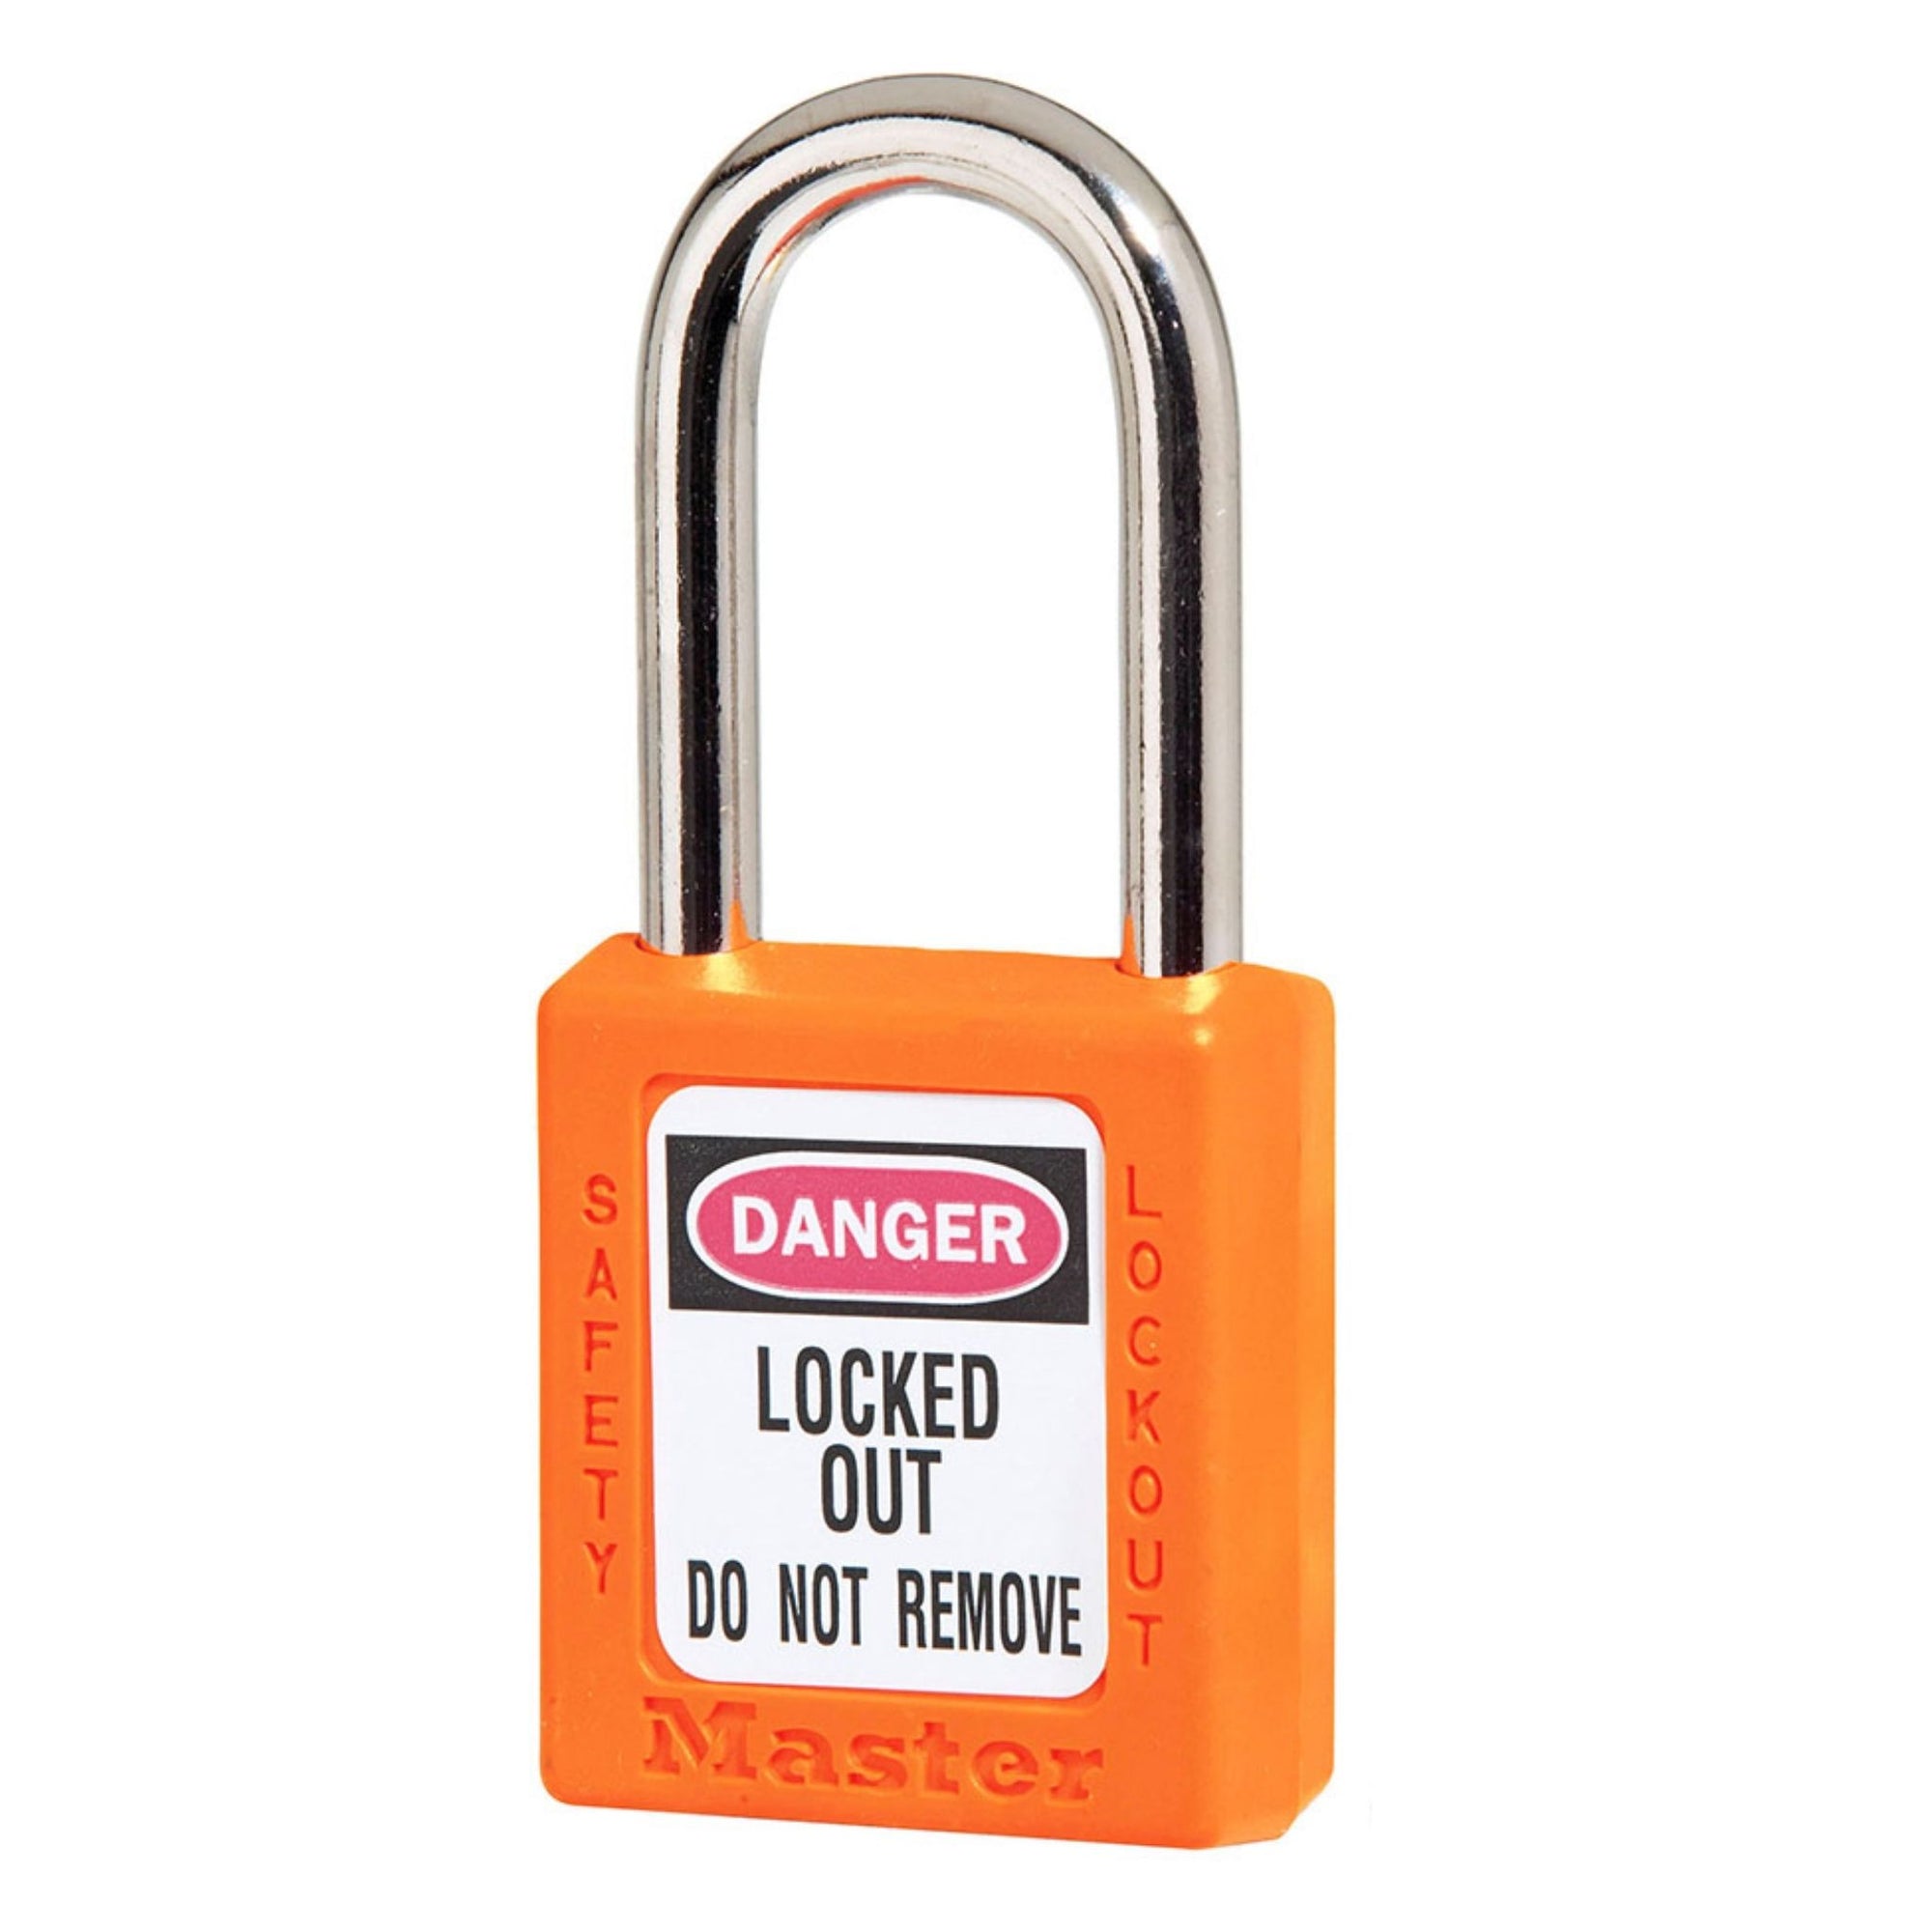 Safety Locks & Devices Customize Your Own Lockout Tagout Padlock